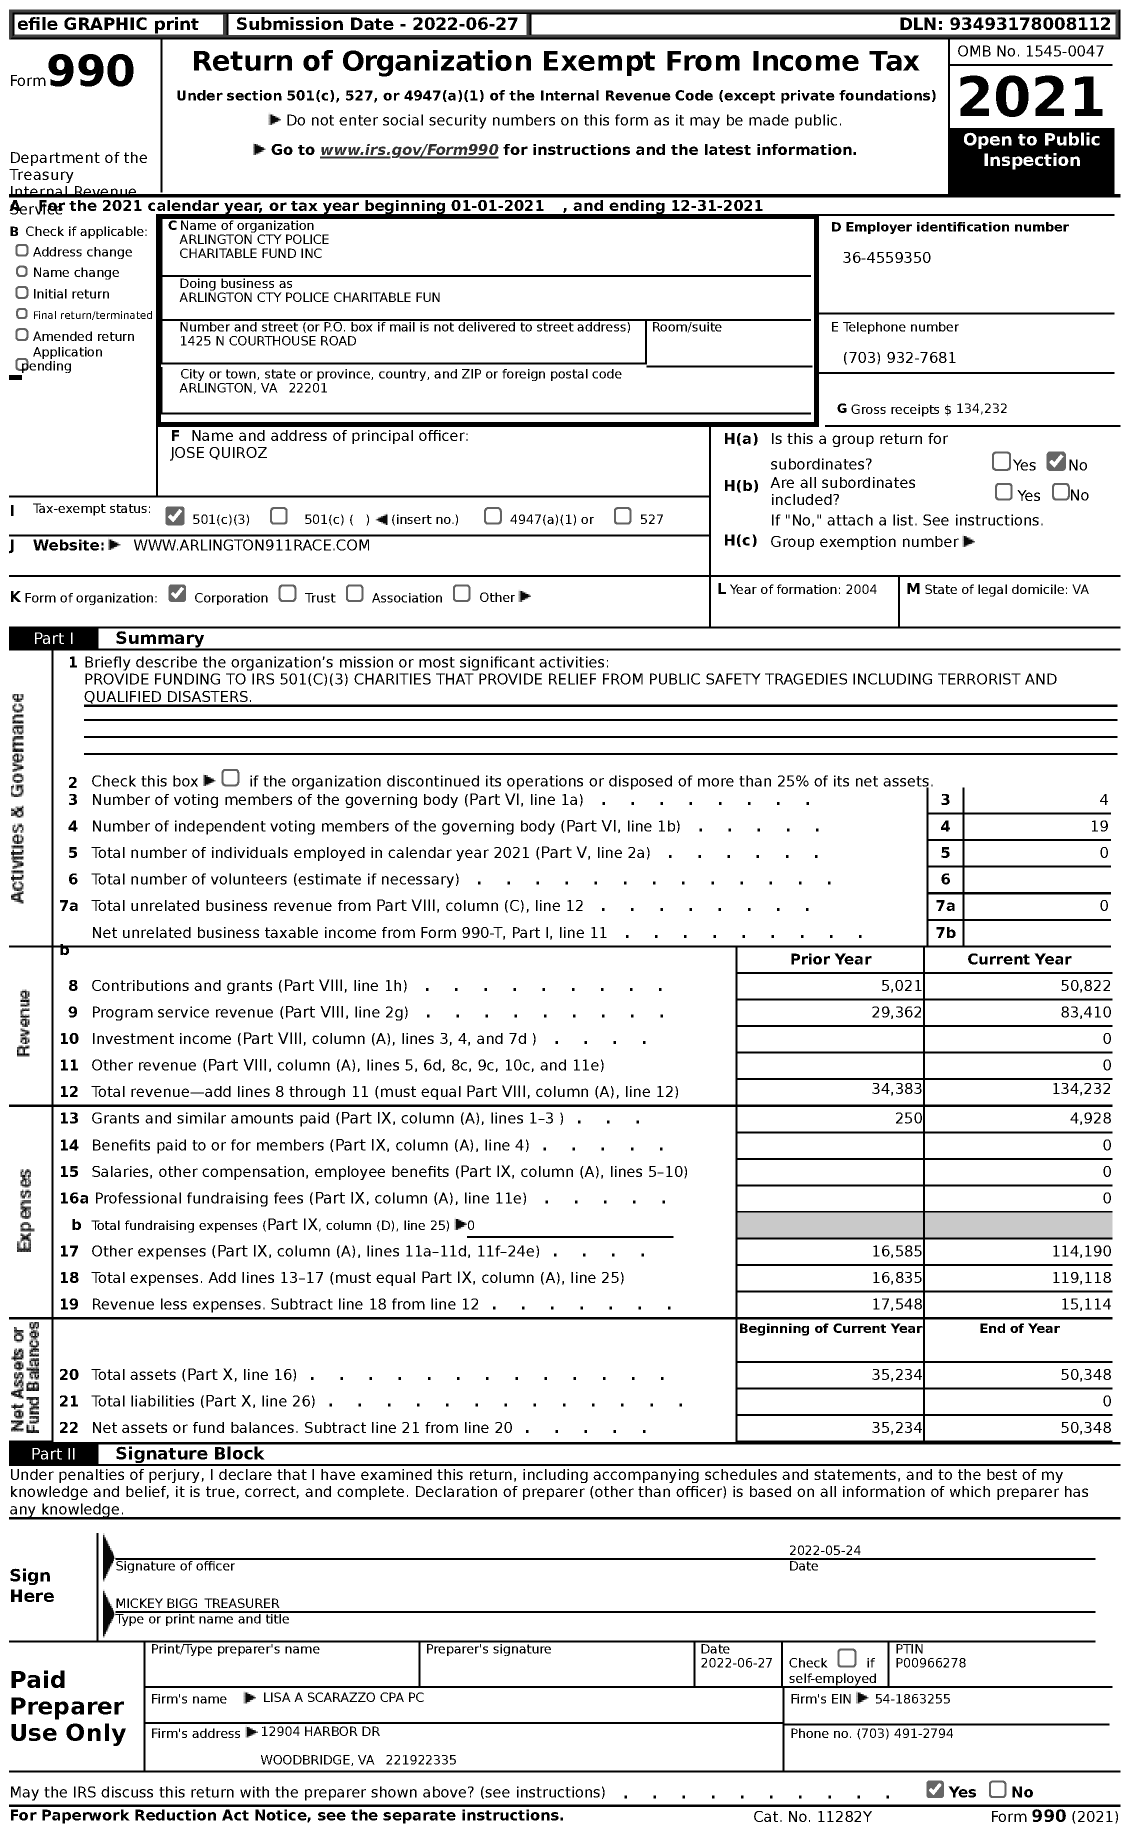 Image of first page of 2021 Form 990 for Arlington Cty Police Charitable Fund